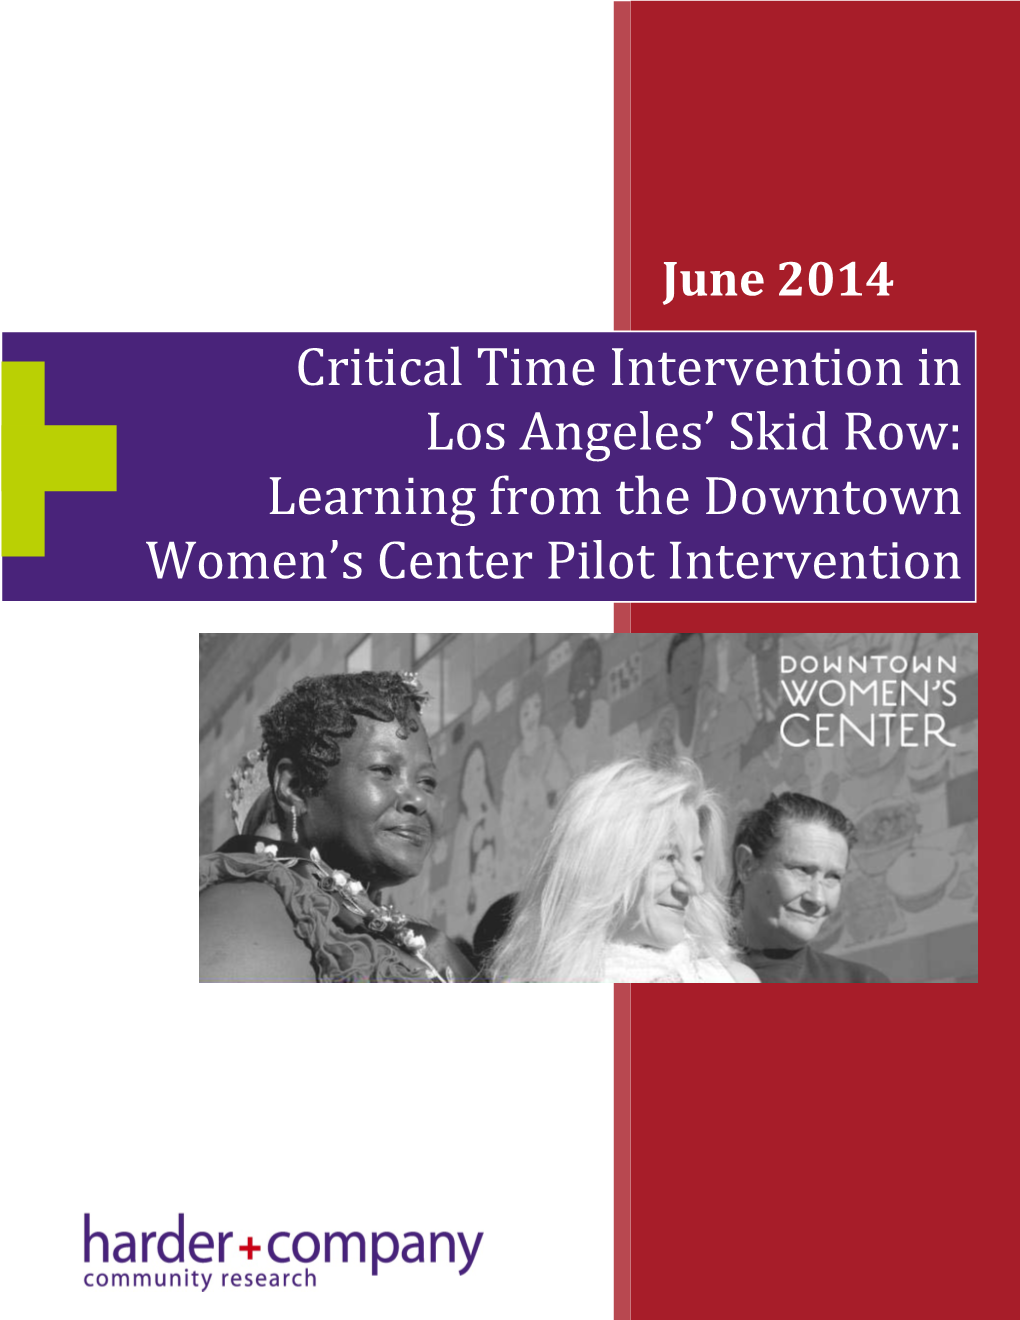 Critical Time Intervention in Los Angeles' Skid Row: Learning From